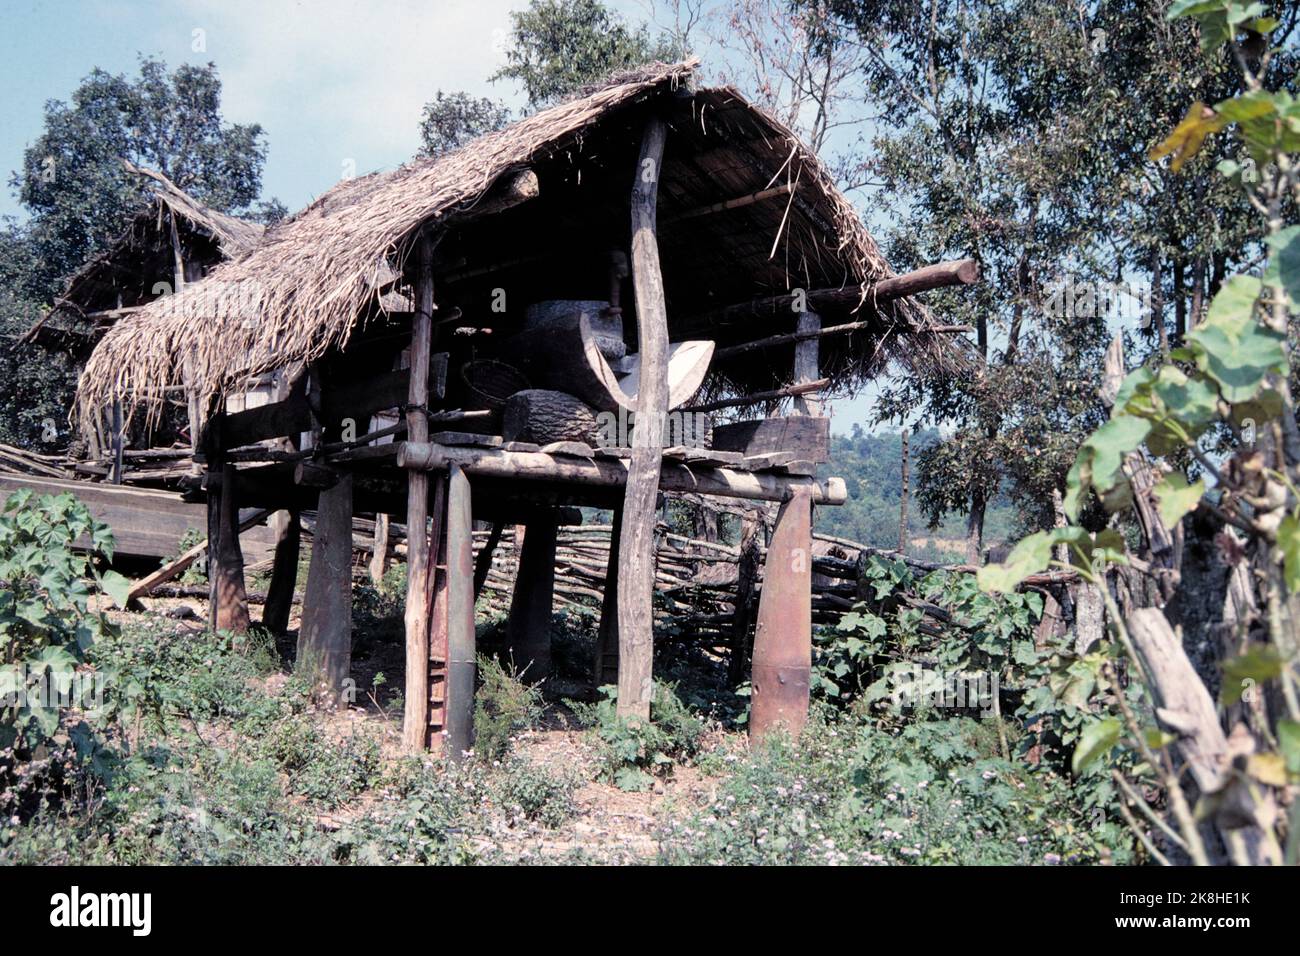 US-made cluster bomb casings put to practical use by Lao villagers as supports for rice storage huts, Plain of Jars, Laos 1997 Stock Photo